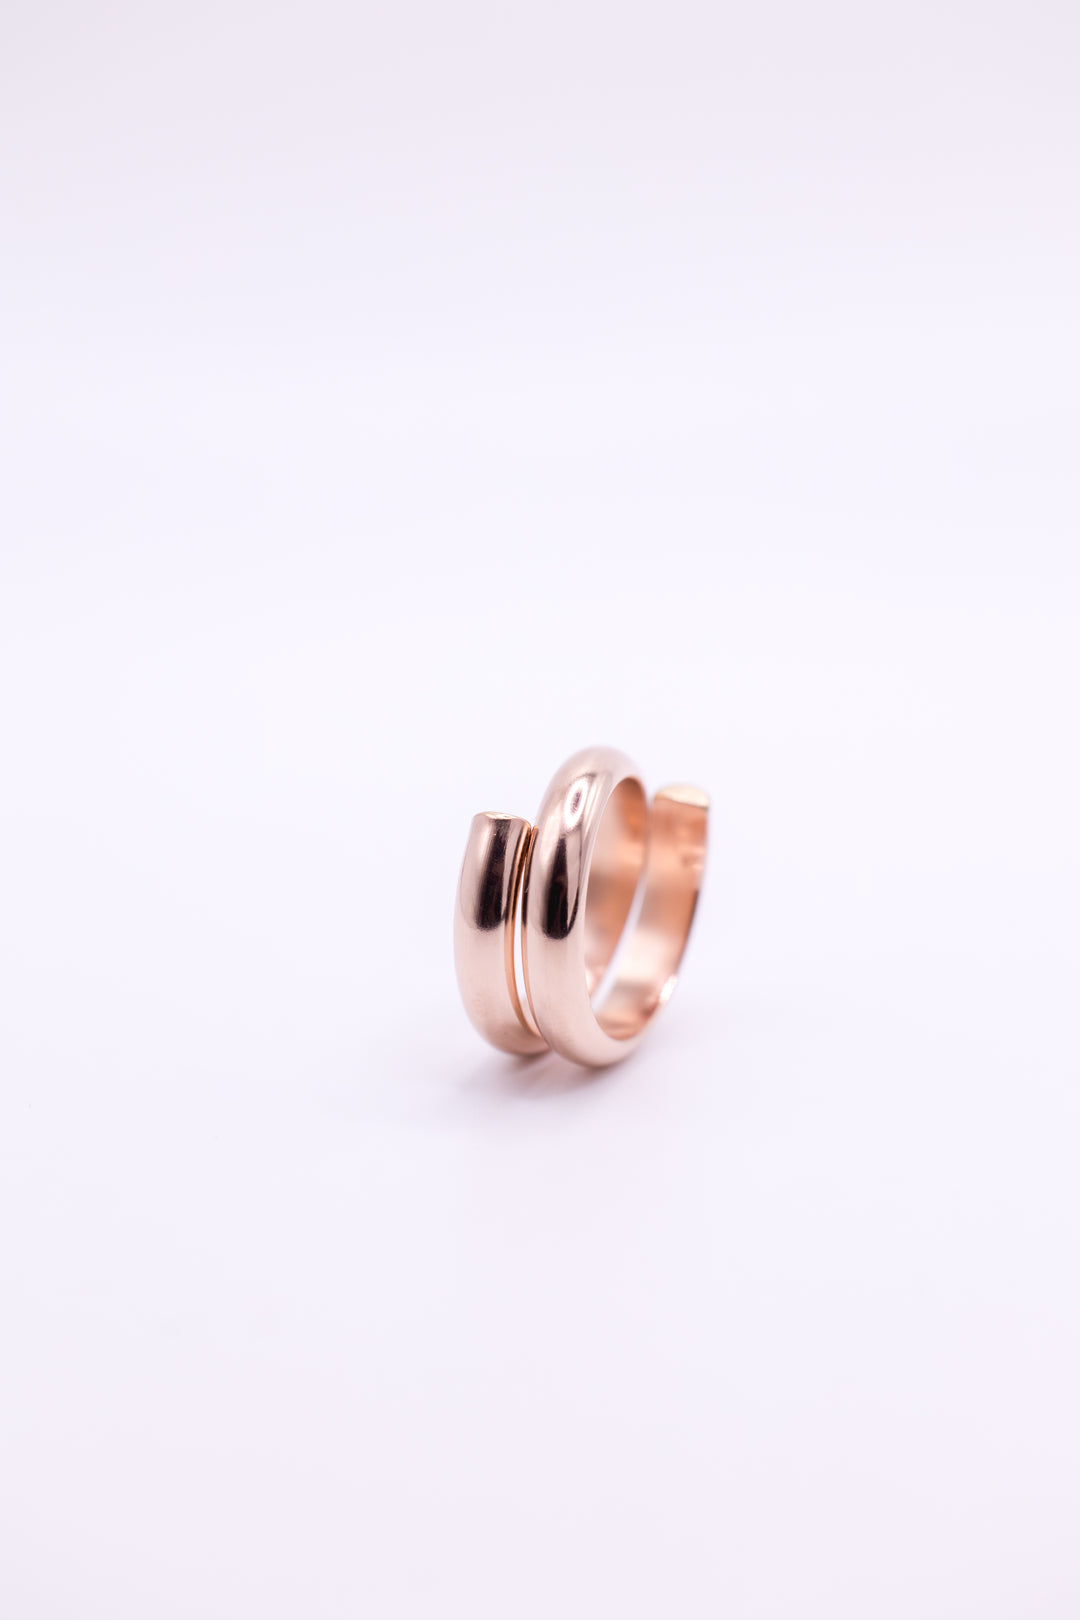 Rose Gold wrap ring by Anna Shae Jewelry in Lexington, Kentucky 